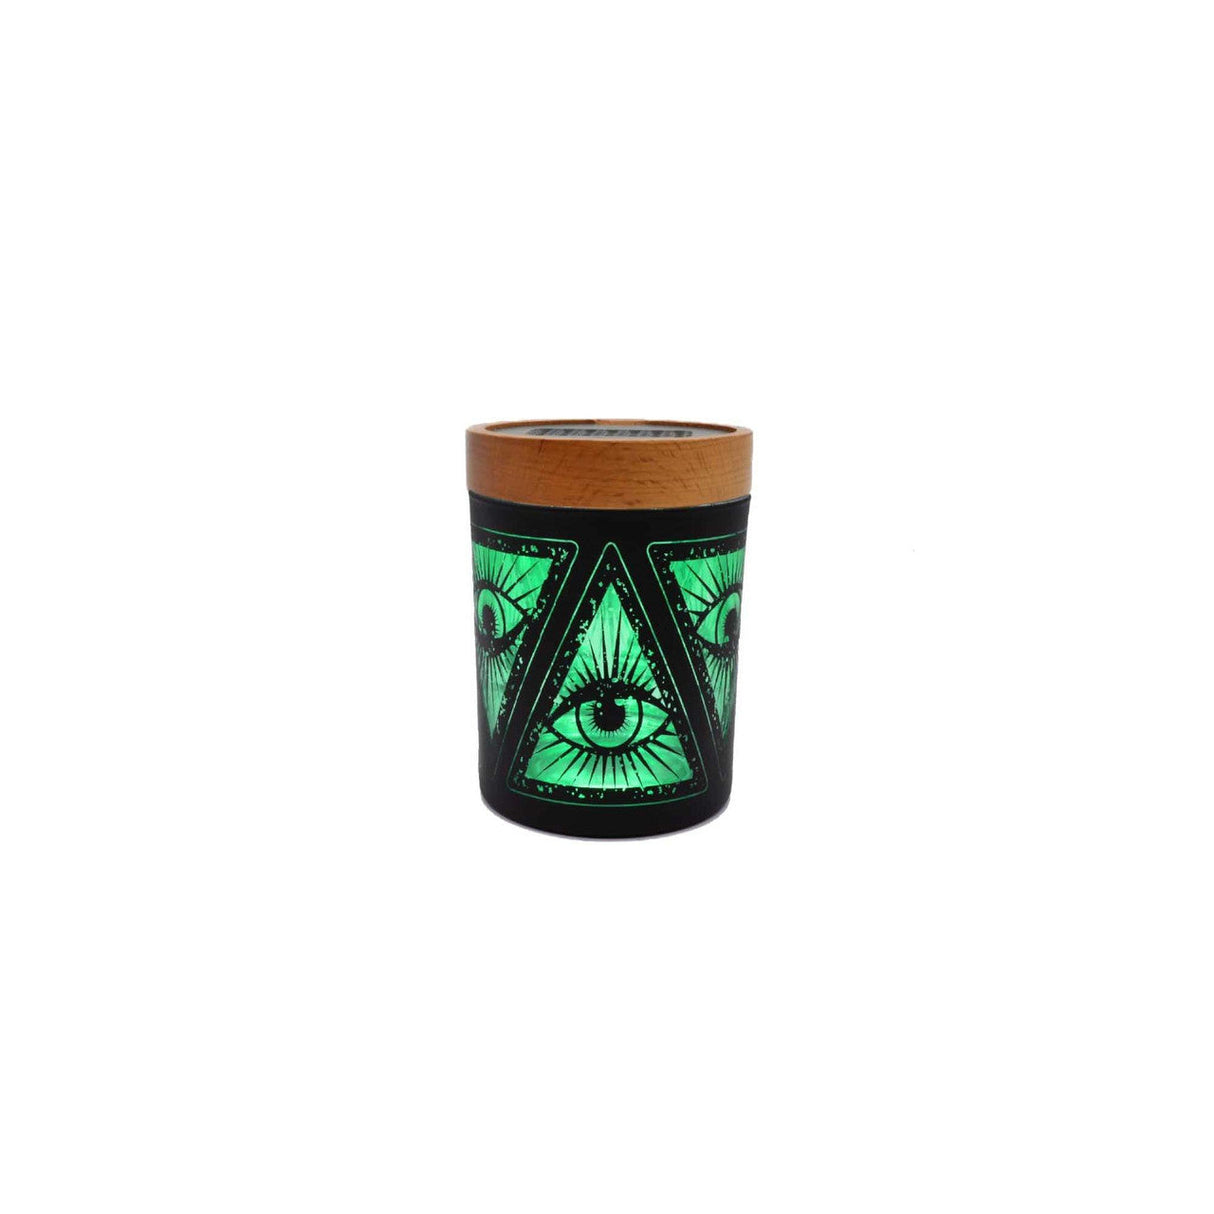 V Syndicate Smart Stash Jar, Small, Illuminati Green with Wooden Lid, Front View, Portable Design